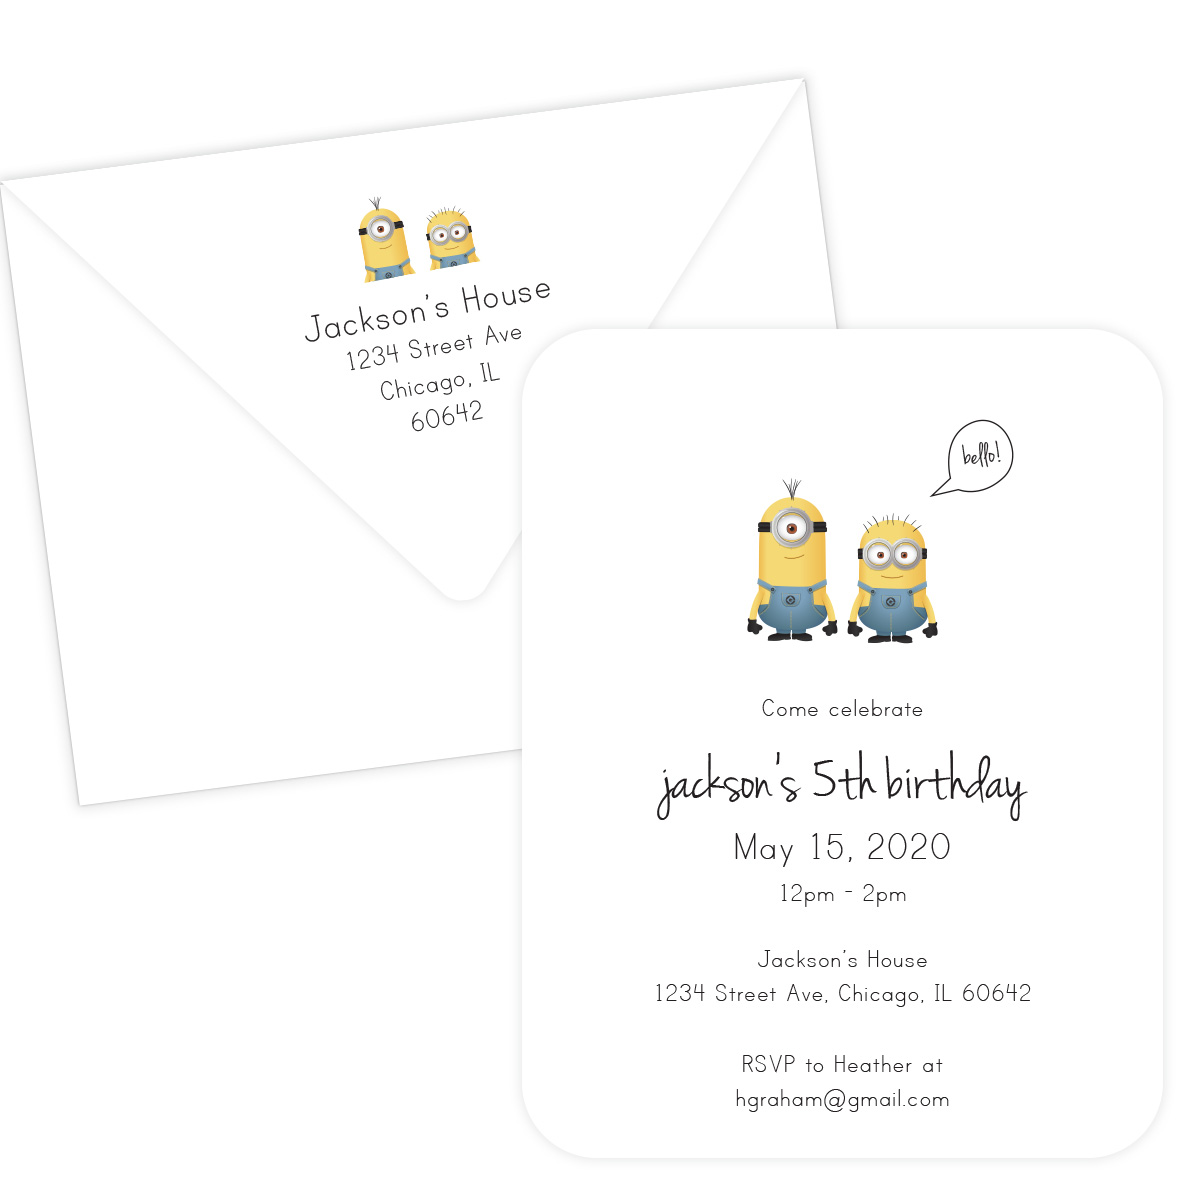 10 x Personalised Birthday Invitations or Thank you Cards MINIONS STAR WARS 